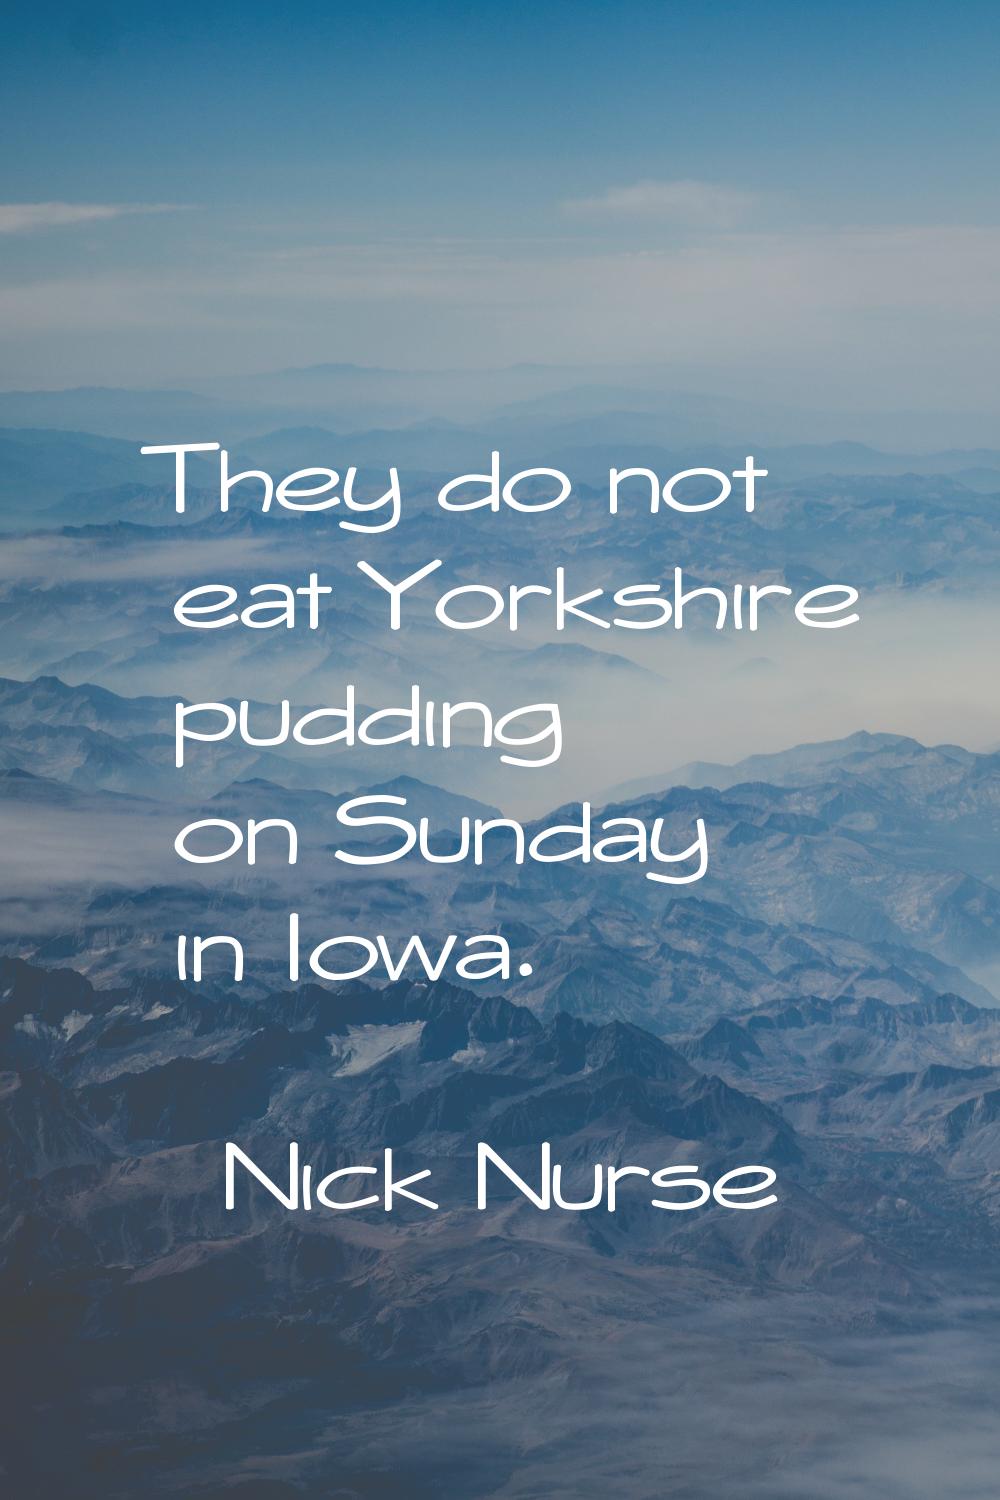 They do not eat Yorkshire pudding on Sunday in Iowa.